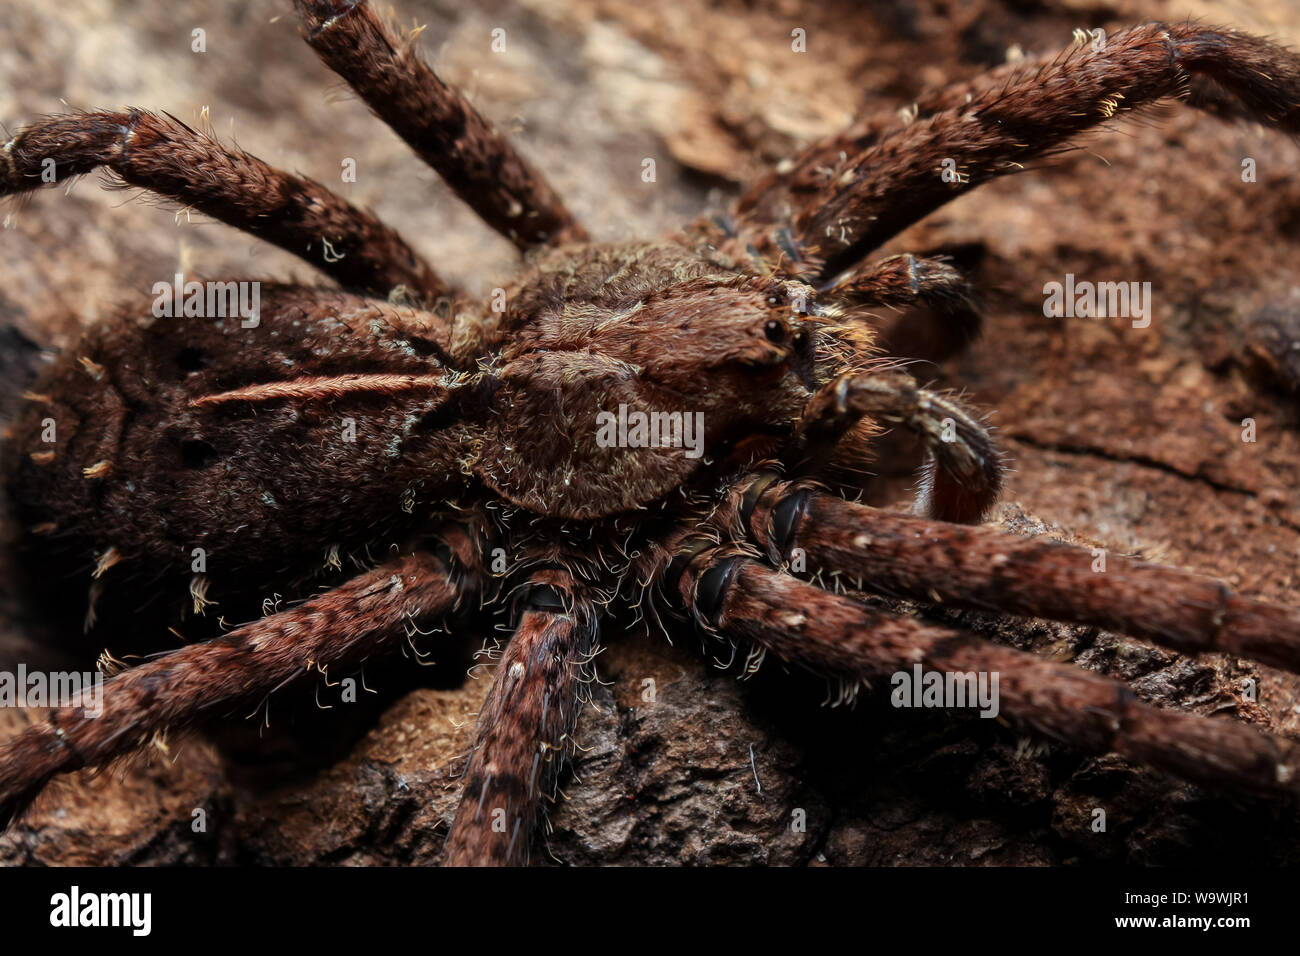 Macro of an Enoploctenus wandering spidre from the atlantic forest in Brazil with legs stretched over a wooden log Stock Photo